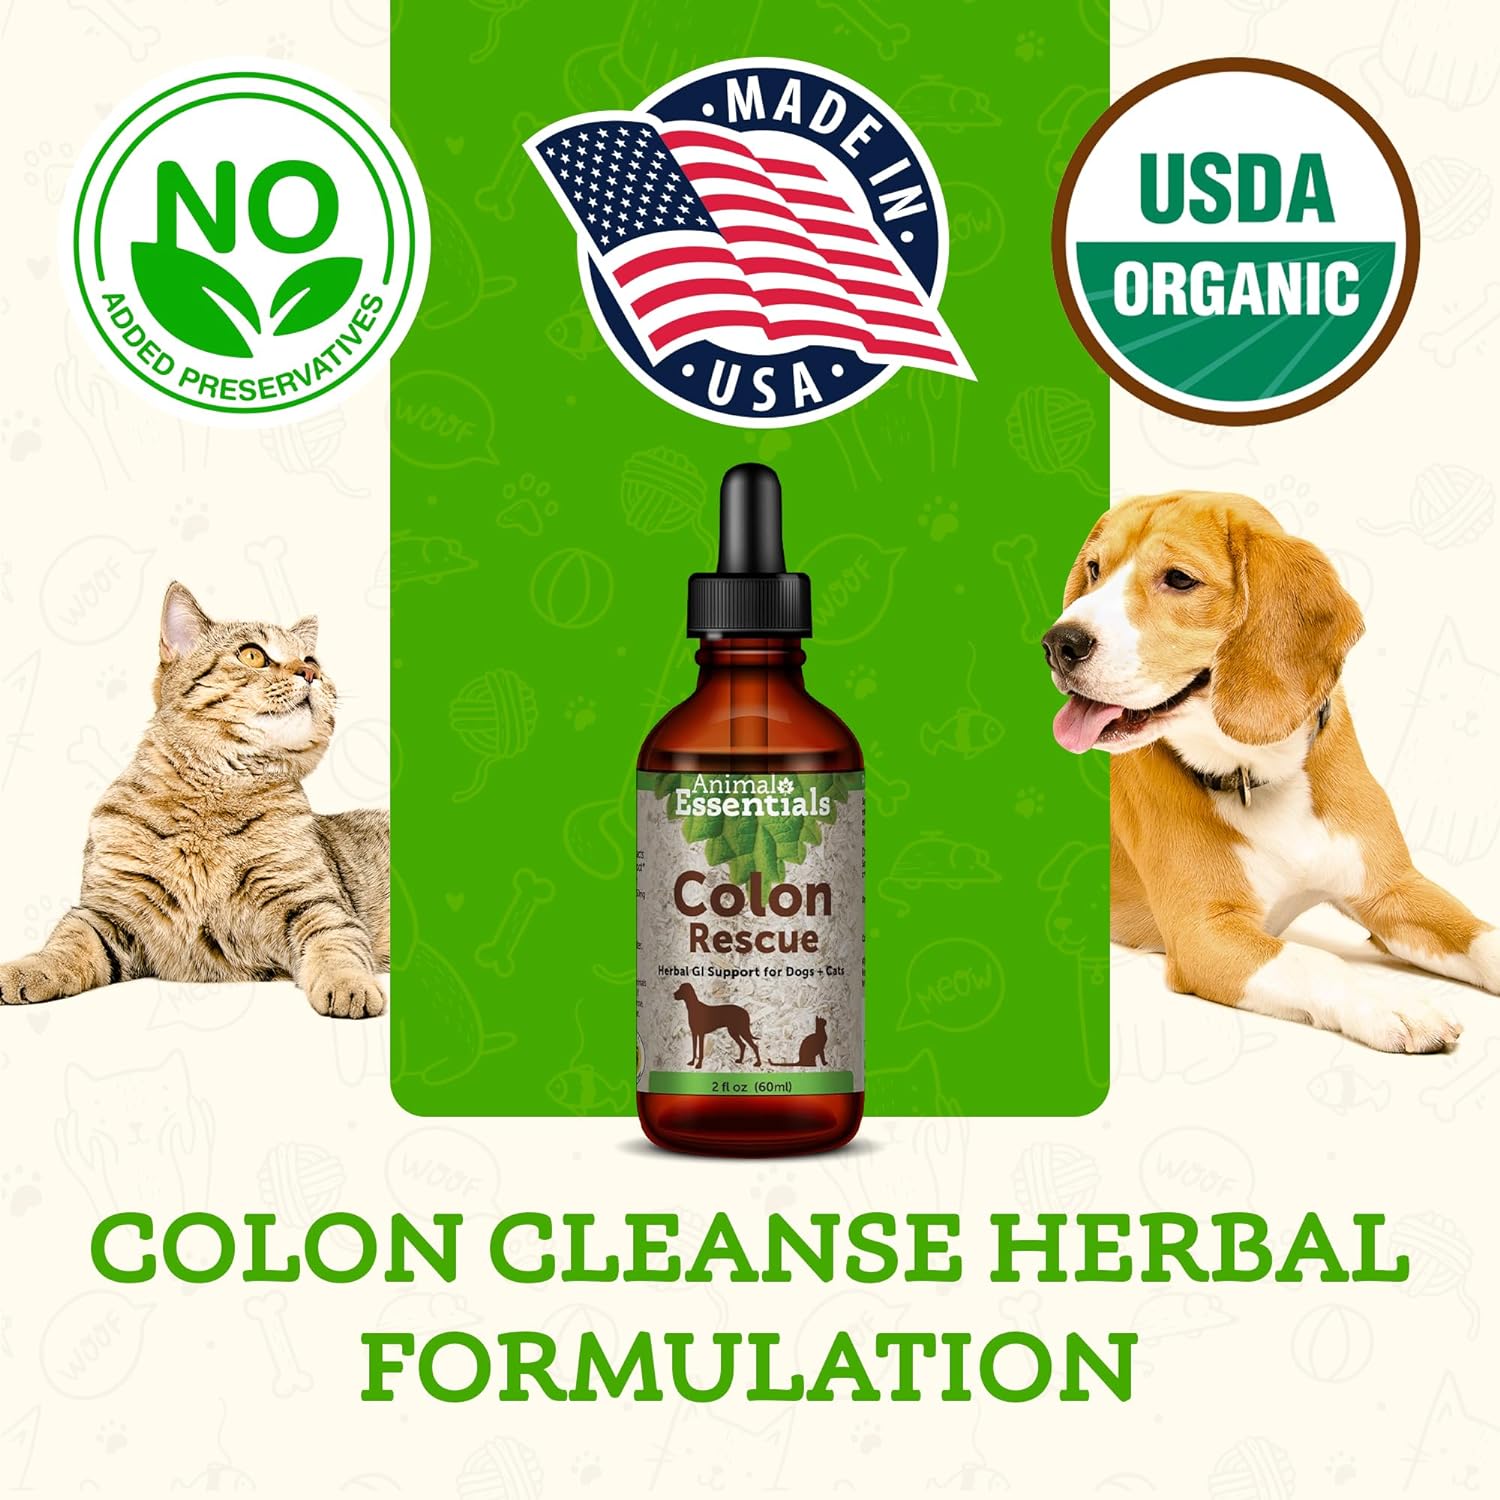 Animal Essentials Colon Rescue- Herbal Formula for Dogs & Cats, Healthy Gastrointestinal Tract, Sweet Taste, 100% Organic Human Grade Herbs, Veterinarian Recommended Animal Wellness Tonic - 2 Fl Oz : Animal S Apawthecary Phytomucil : Pet Supplies